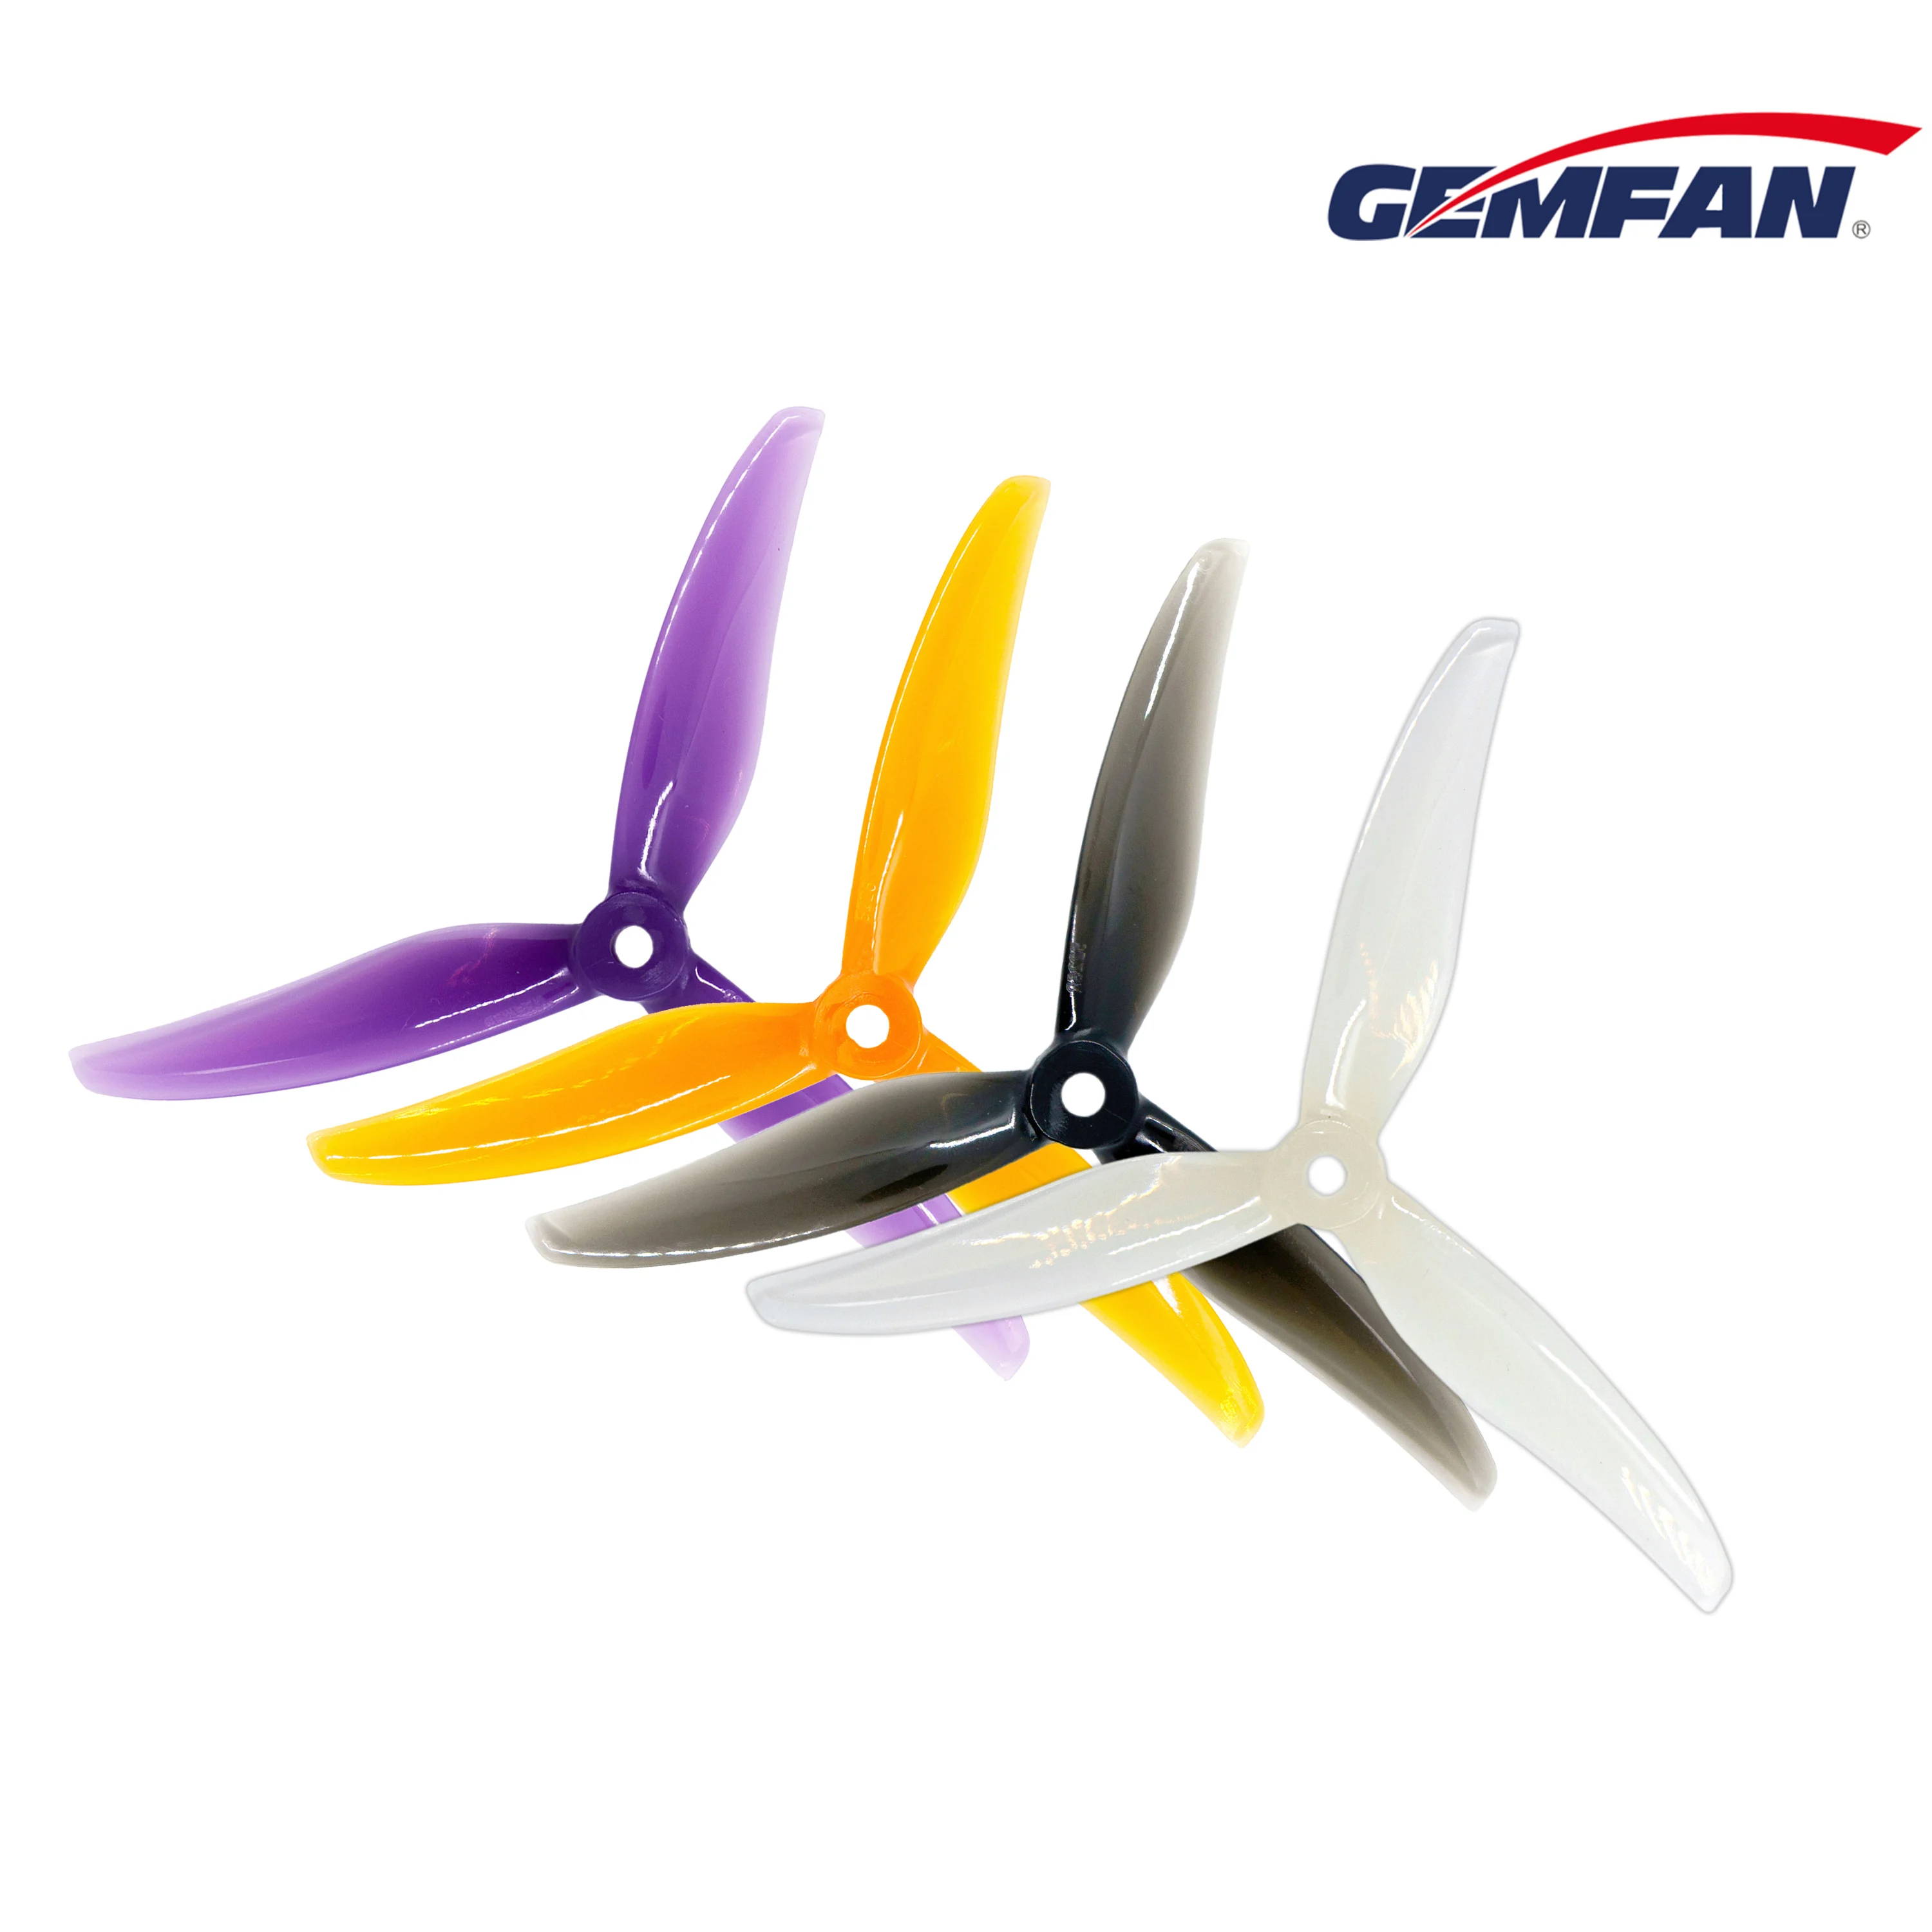 Gemfan Freestyle 5226 5.2x2.6 3-Blade Mixed color propeller